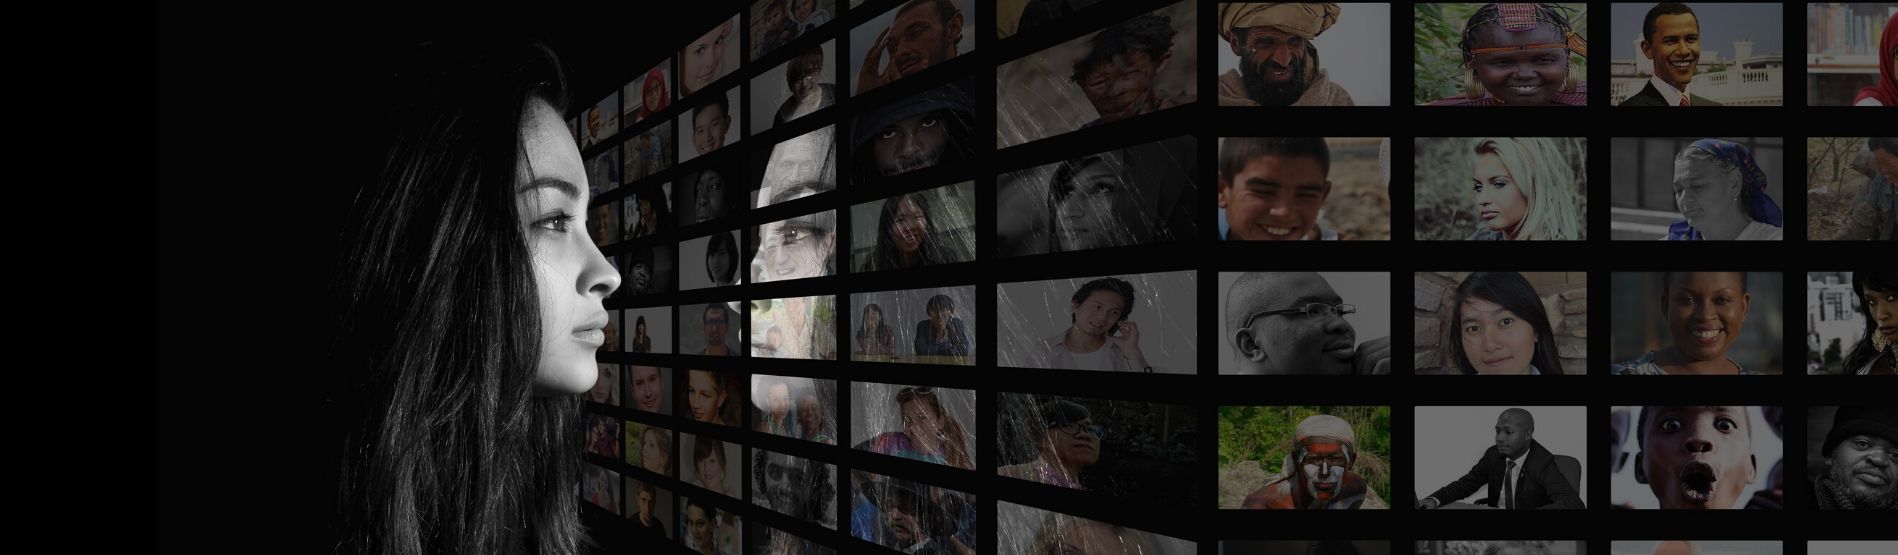 woman looking at multiple images of people on a black wall